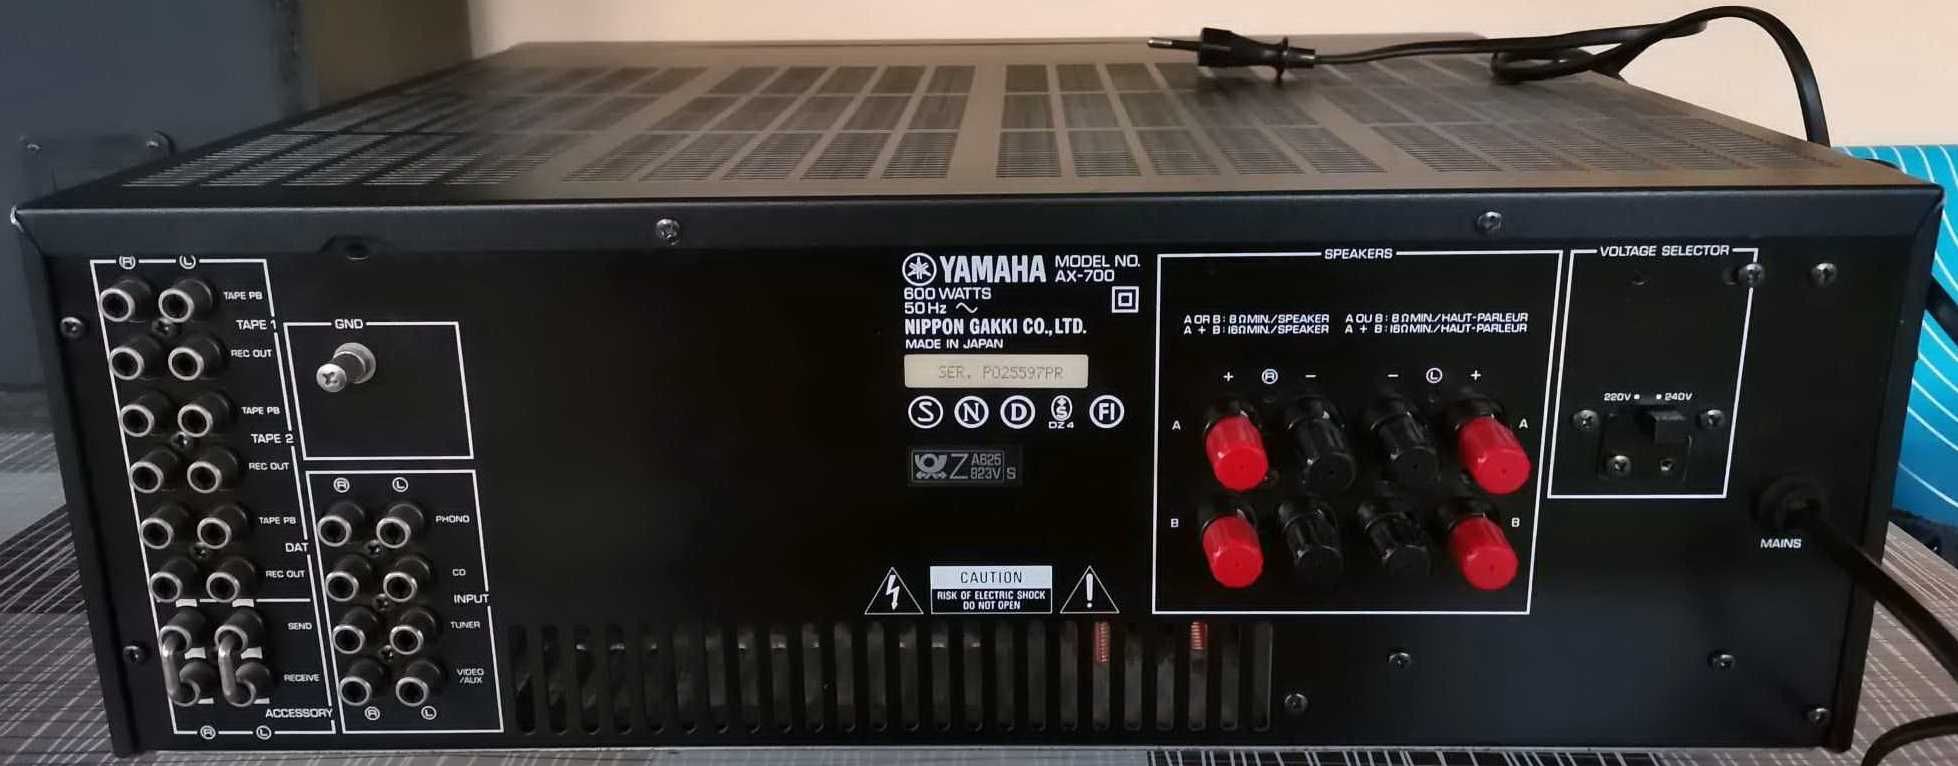 Amplificator Yamaha AX-700 (110W), made in Japan, impecabil!